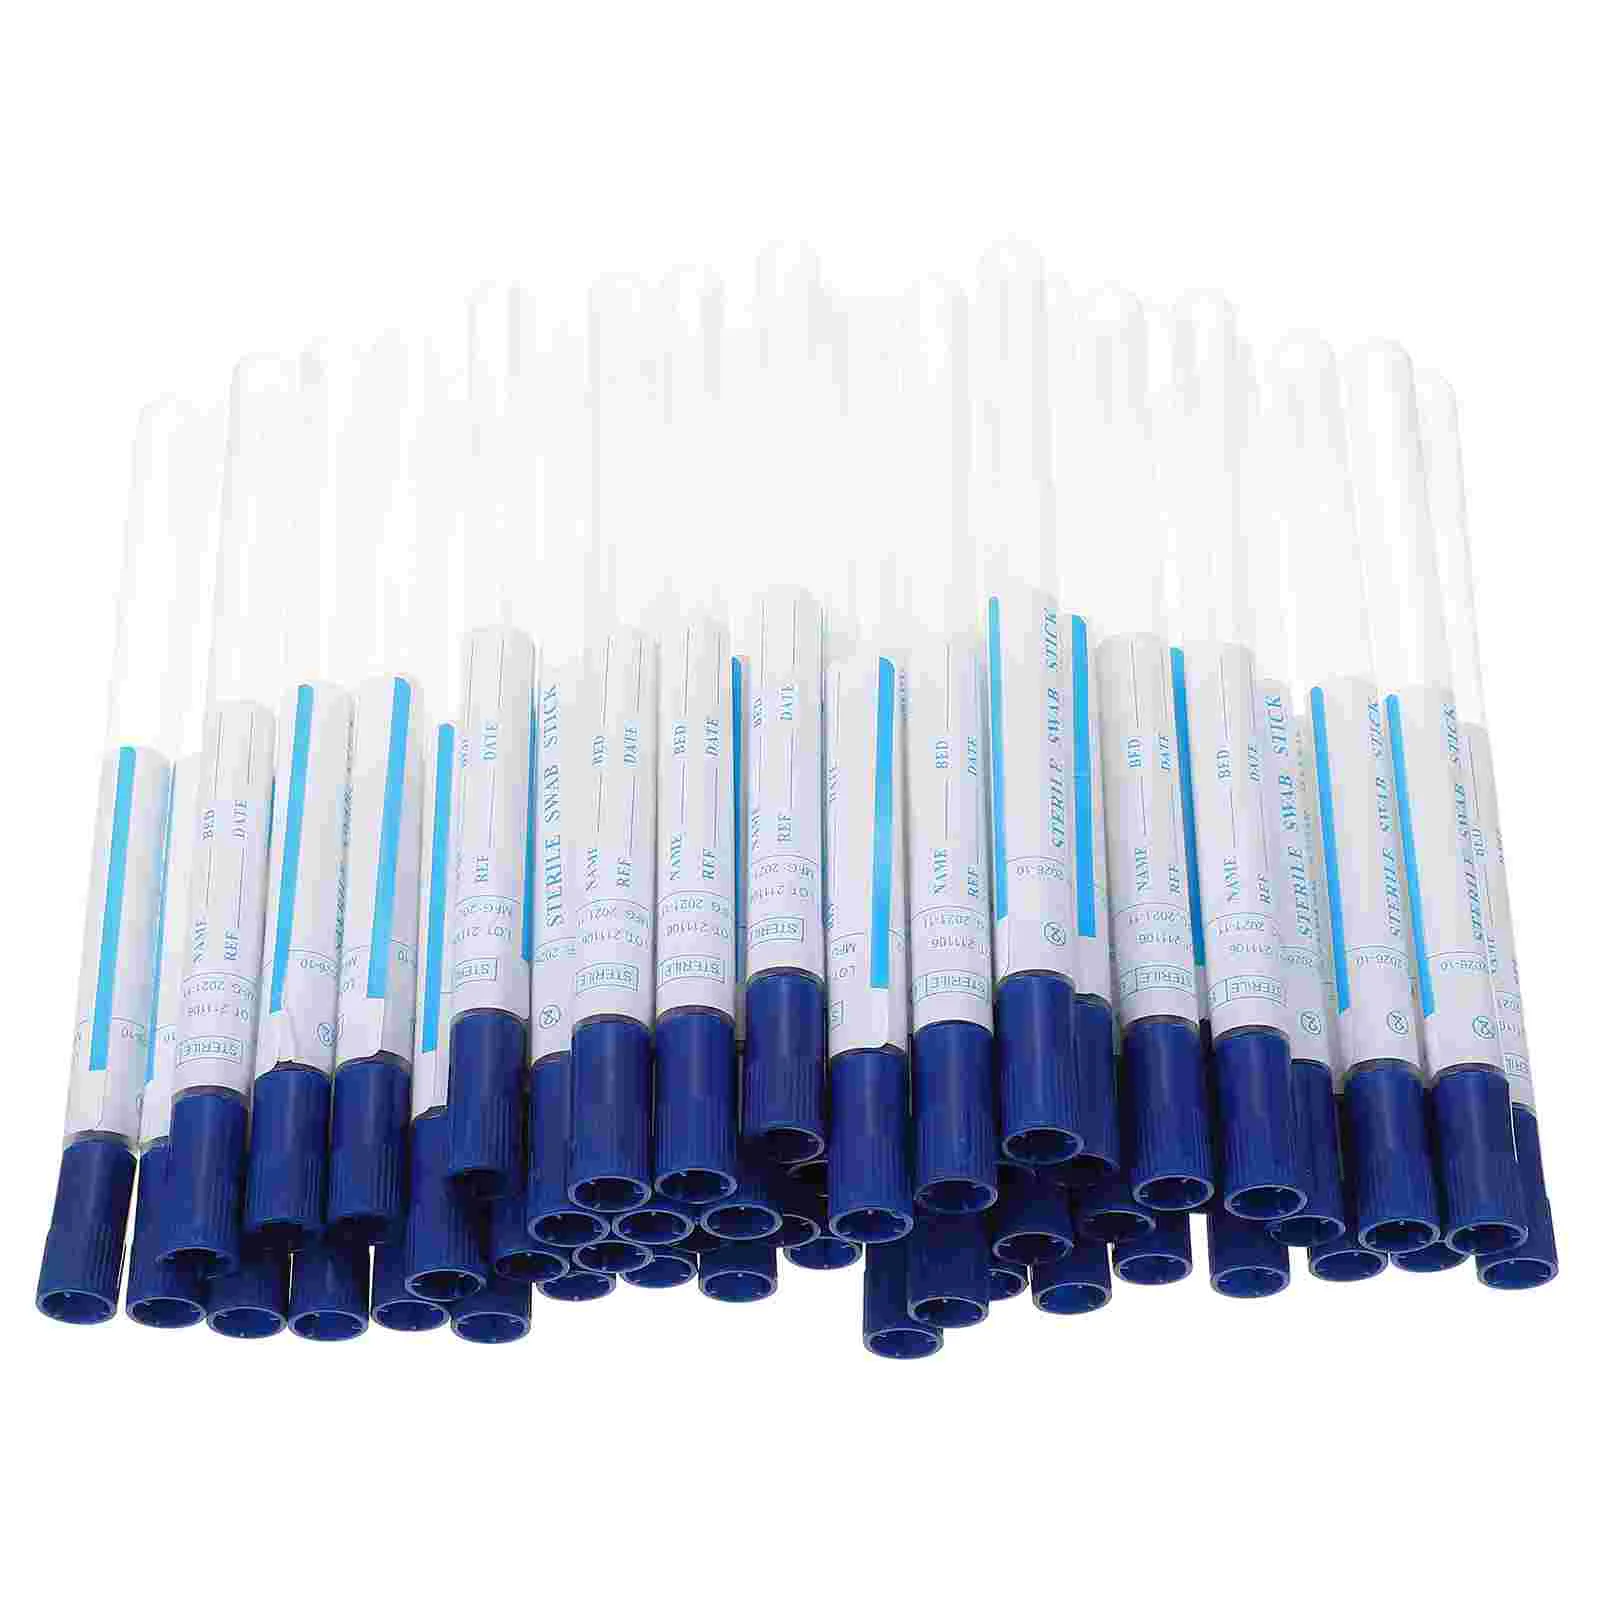 

50 Sets Sampling Swab Portable Swabs Specimen Disposable Nasal Cleaning Accessories Professional Sterile Supply